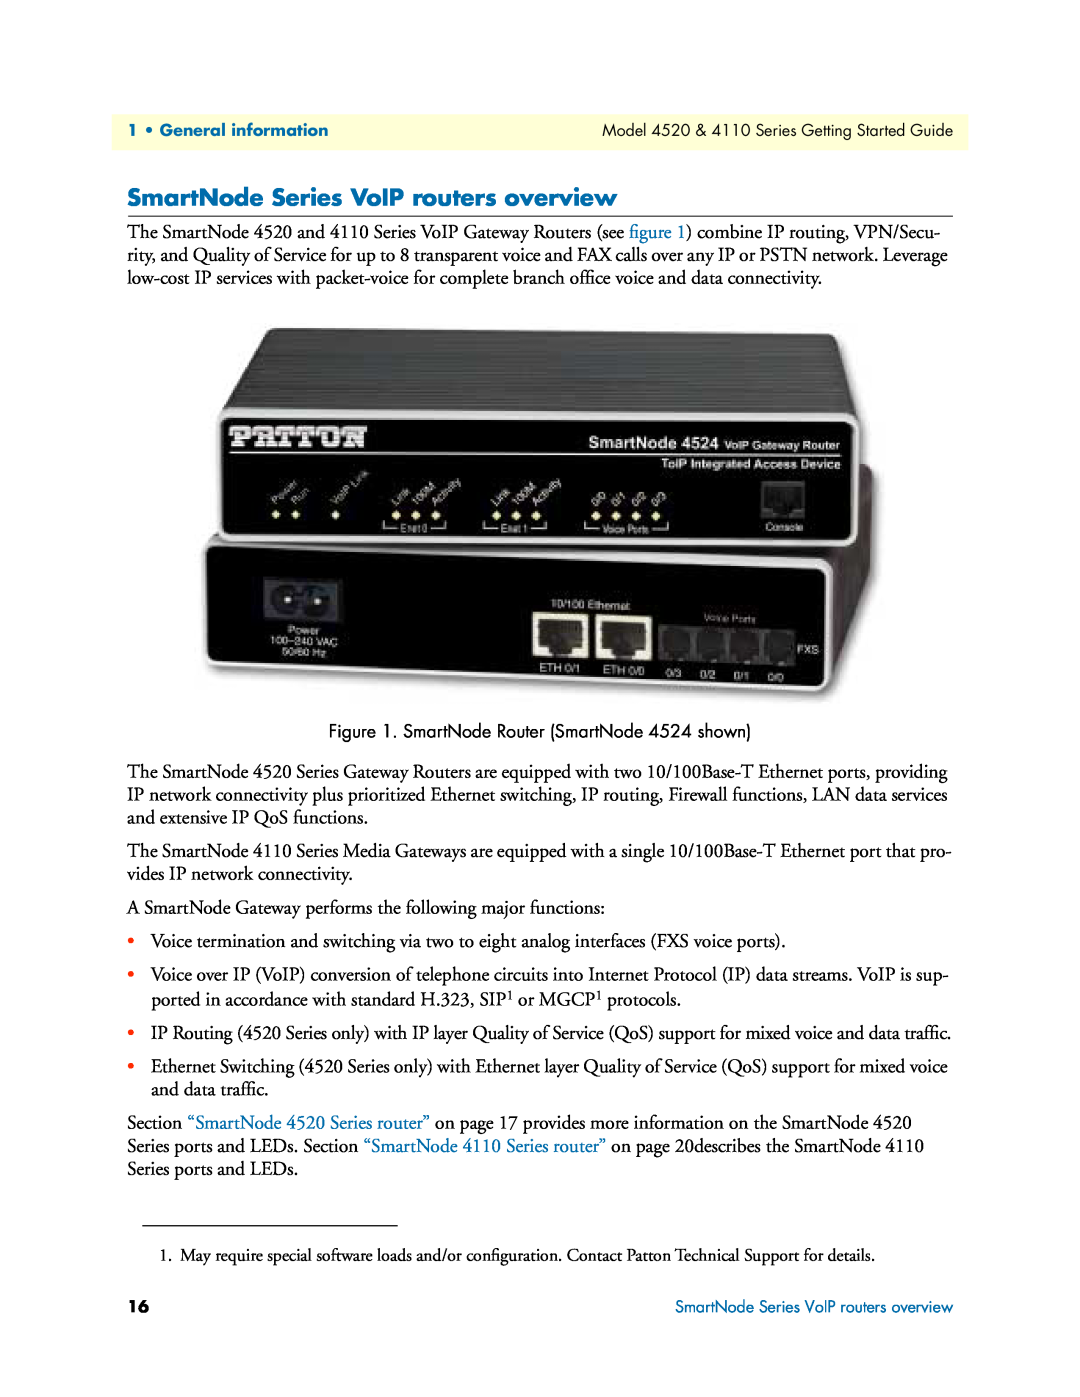 Patton electronic 4110 manual SmartNode Series VoIP routers overview 